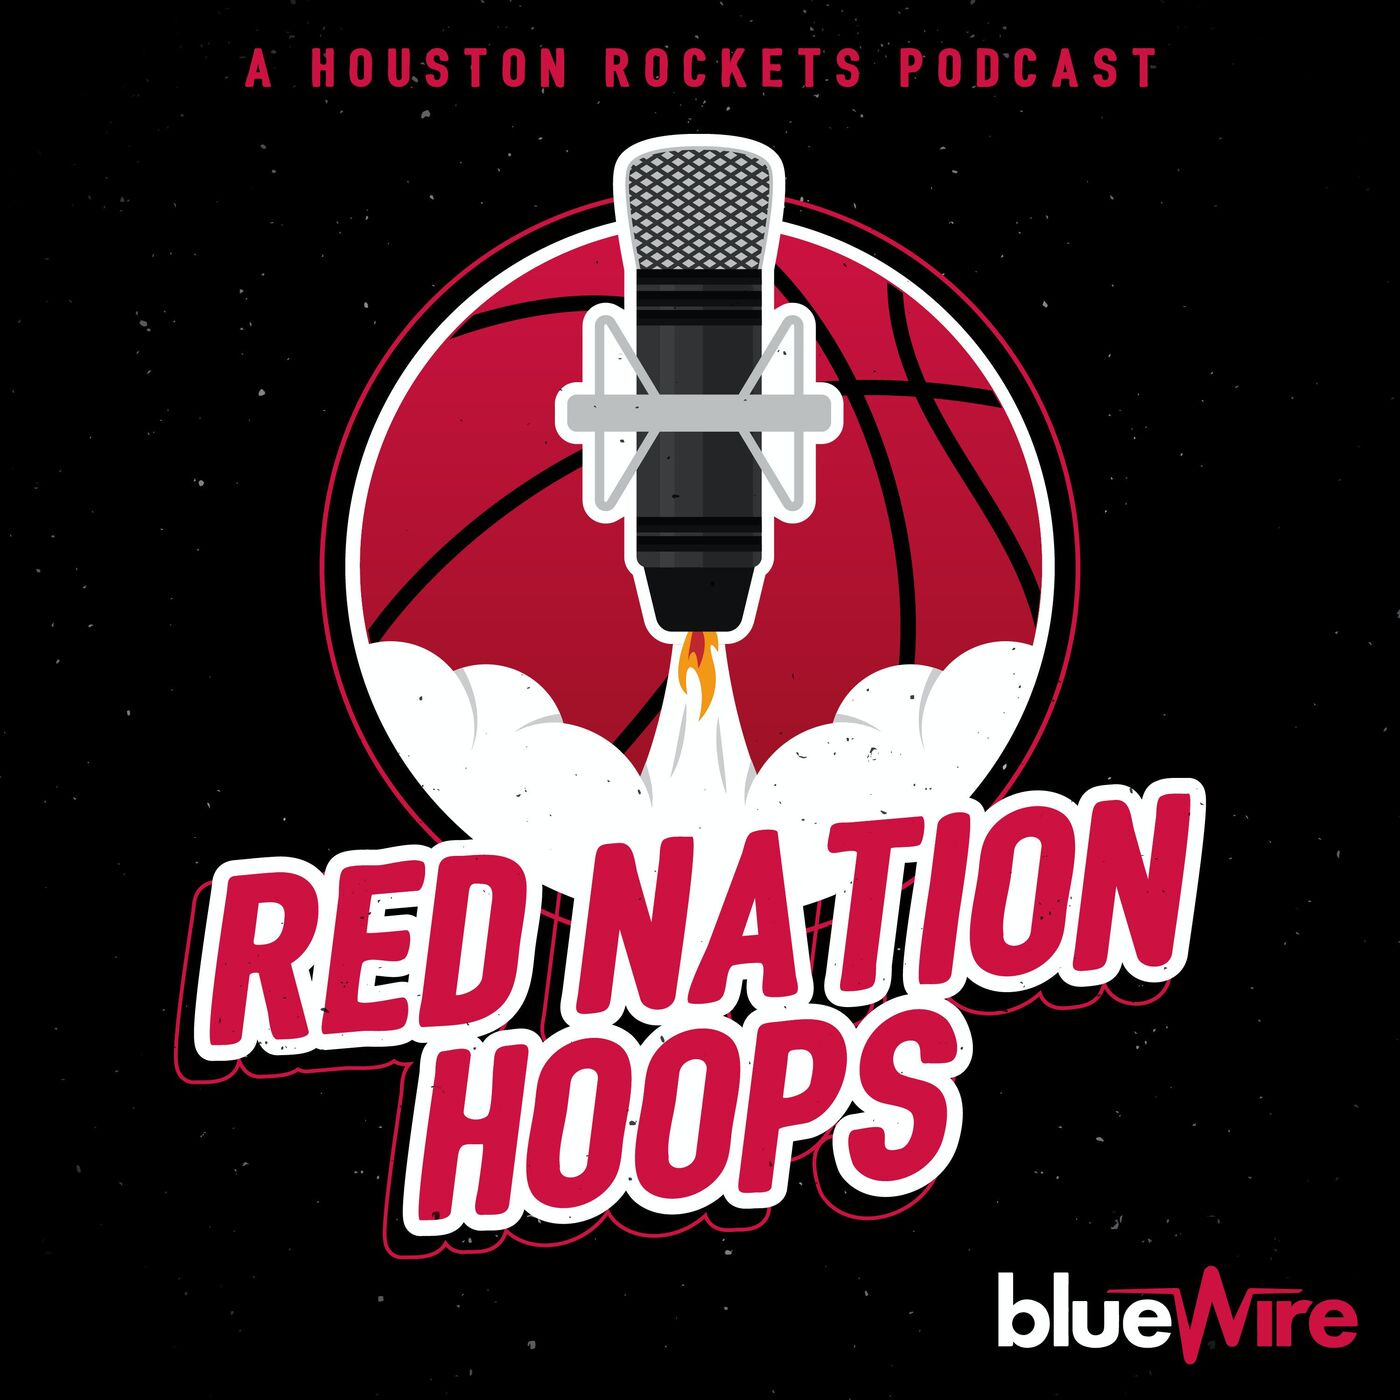 Ep. 130: State of the Rockets w/ Jackson Gatlin